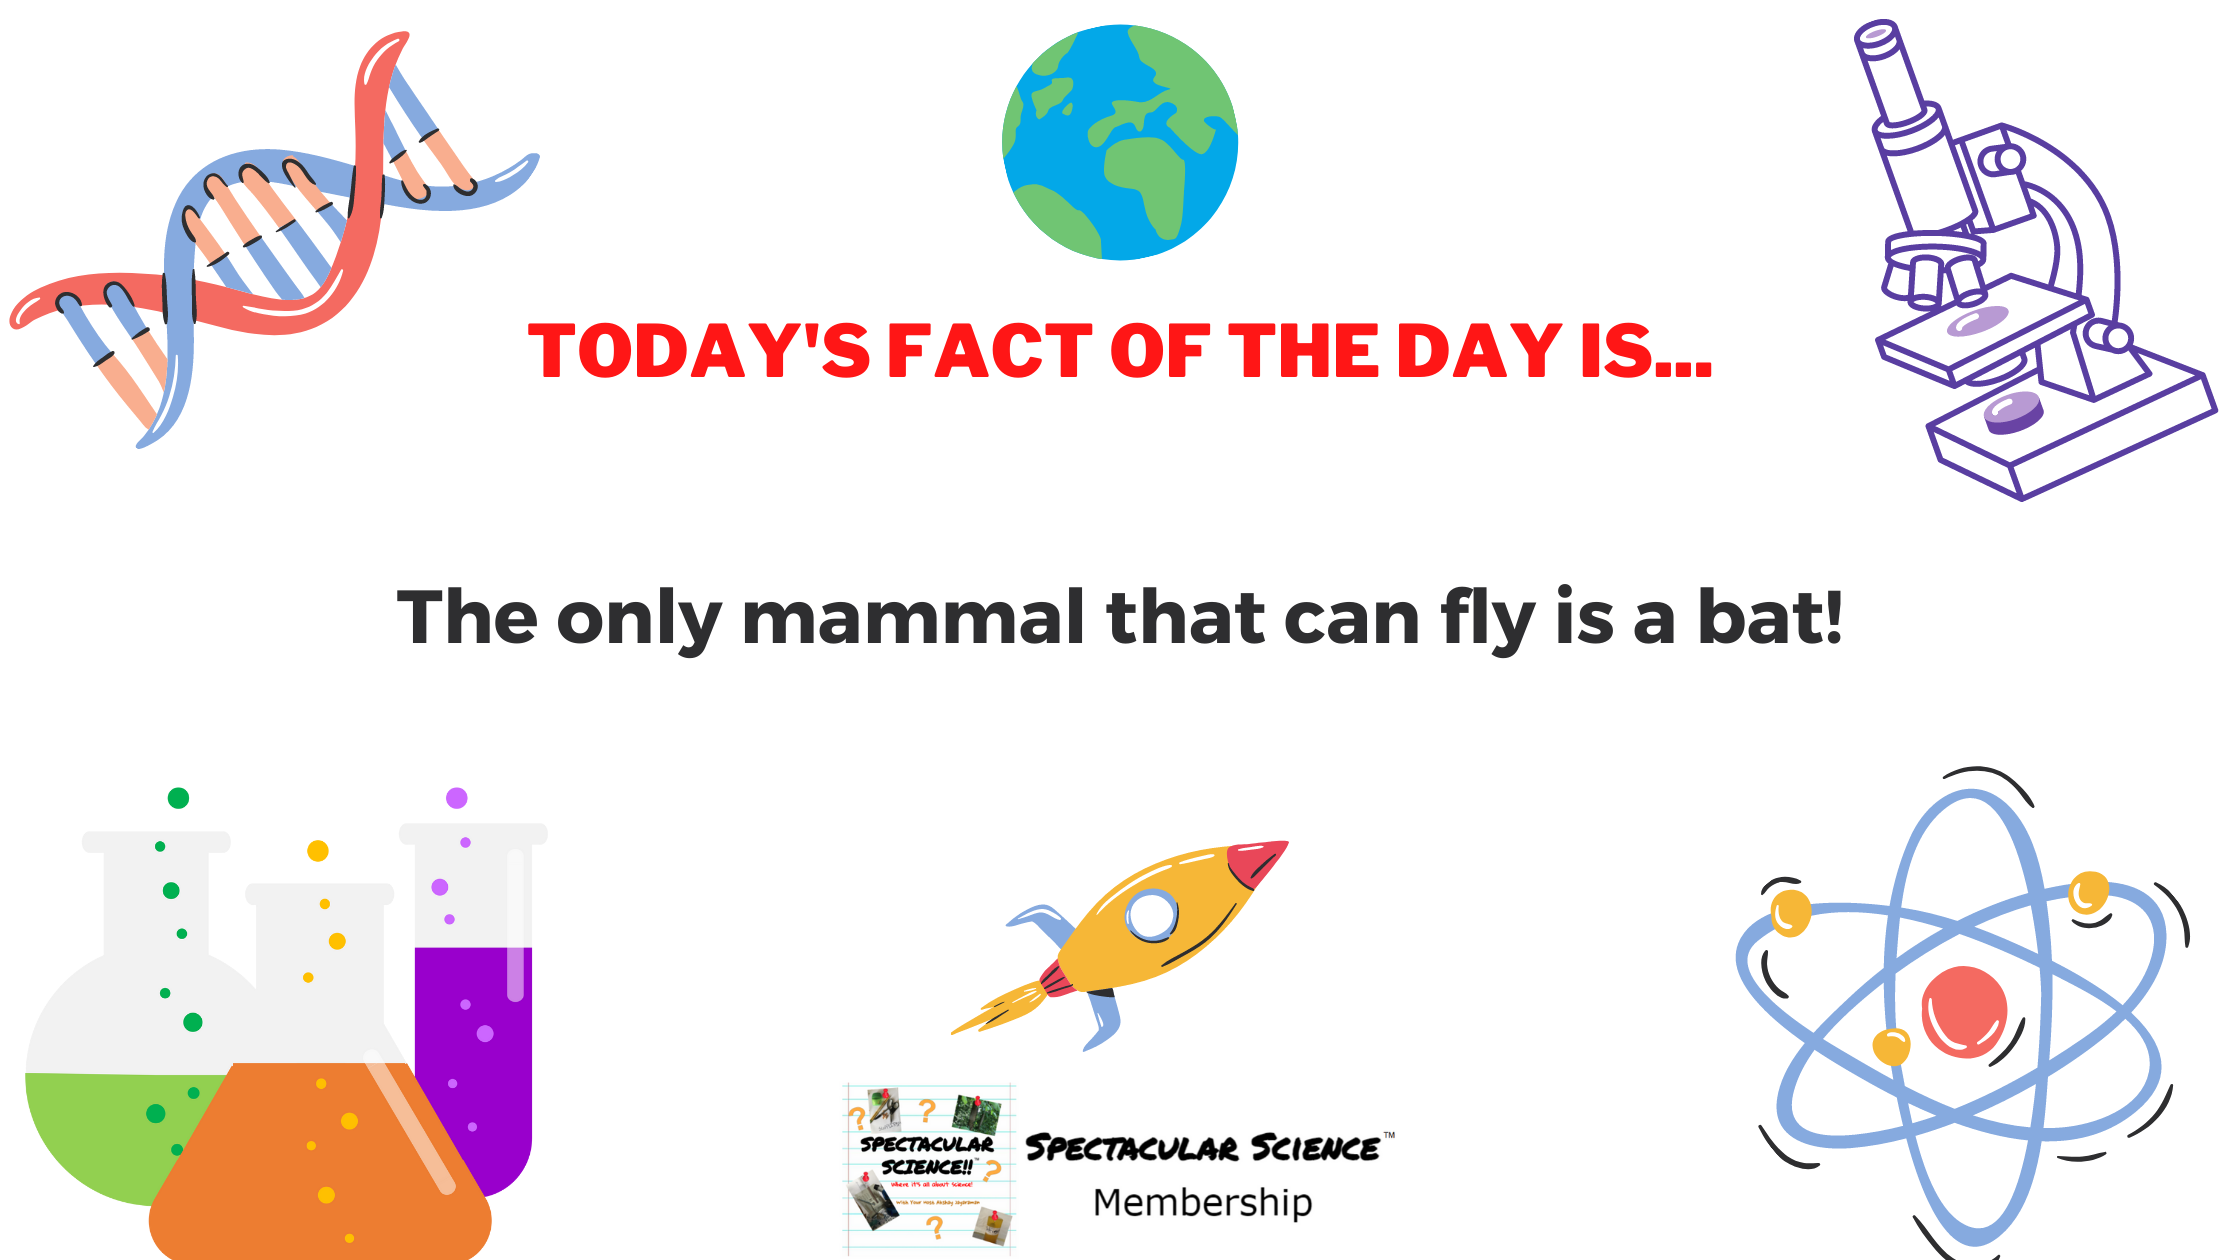 Fact of the Day Image Apr. 6th